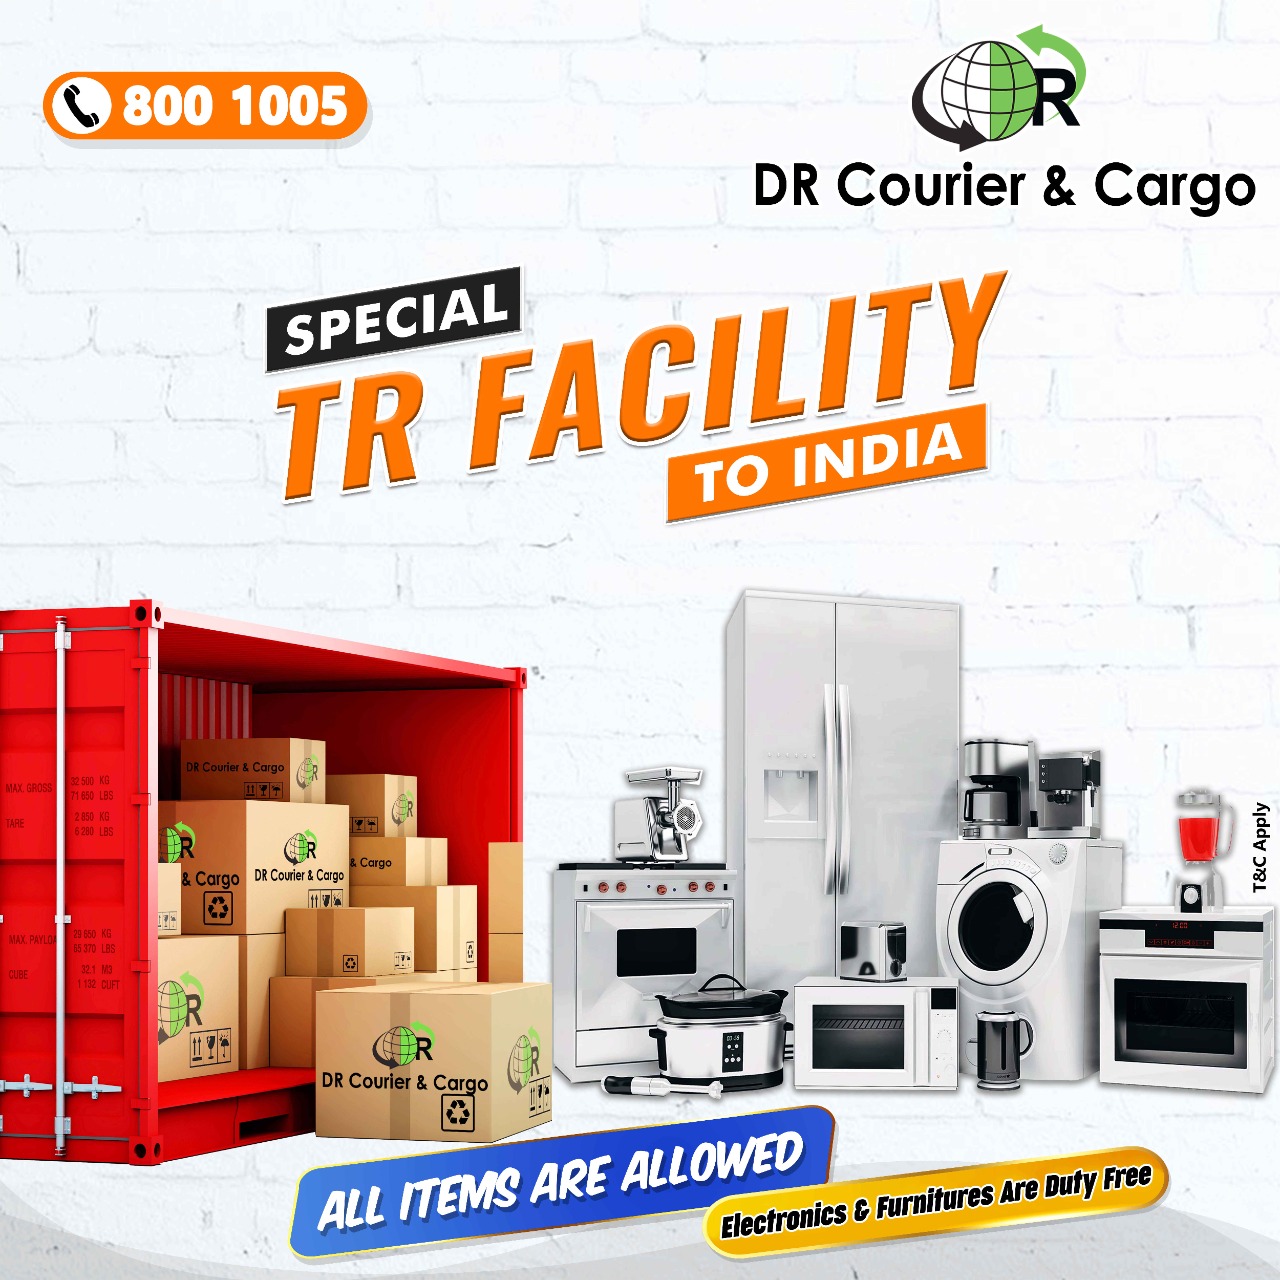 Special TR Facility to India